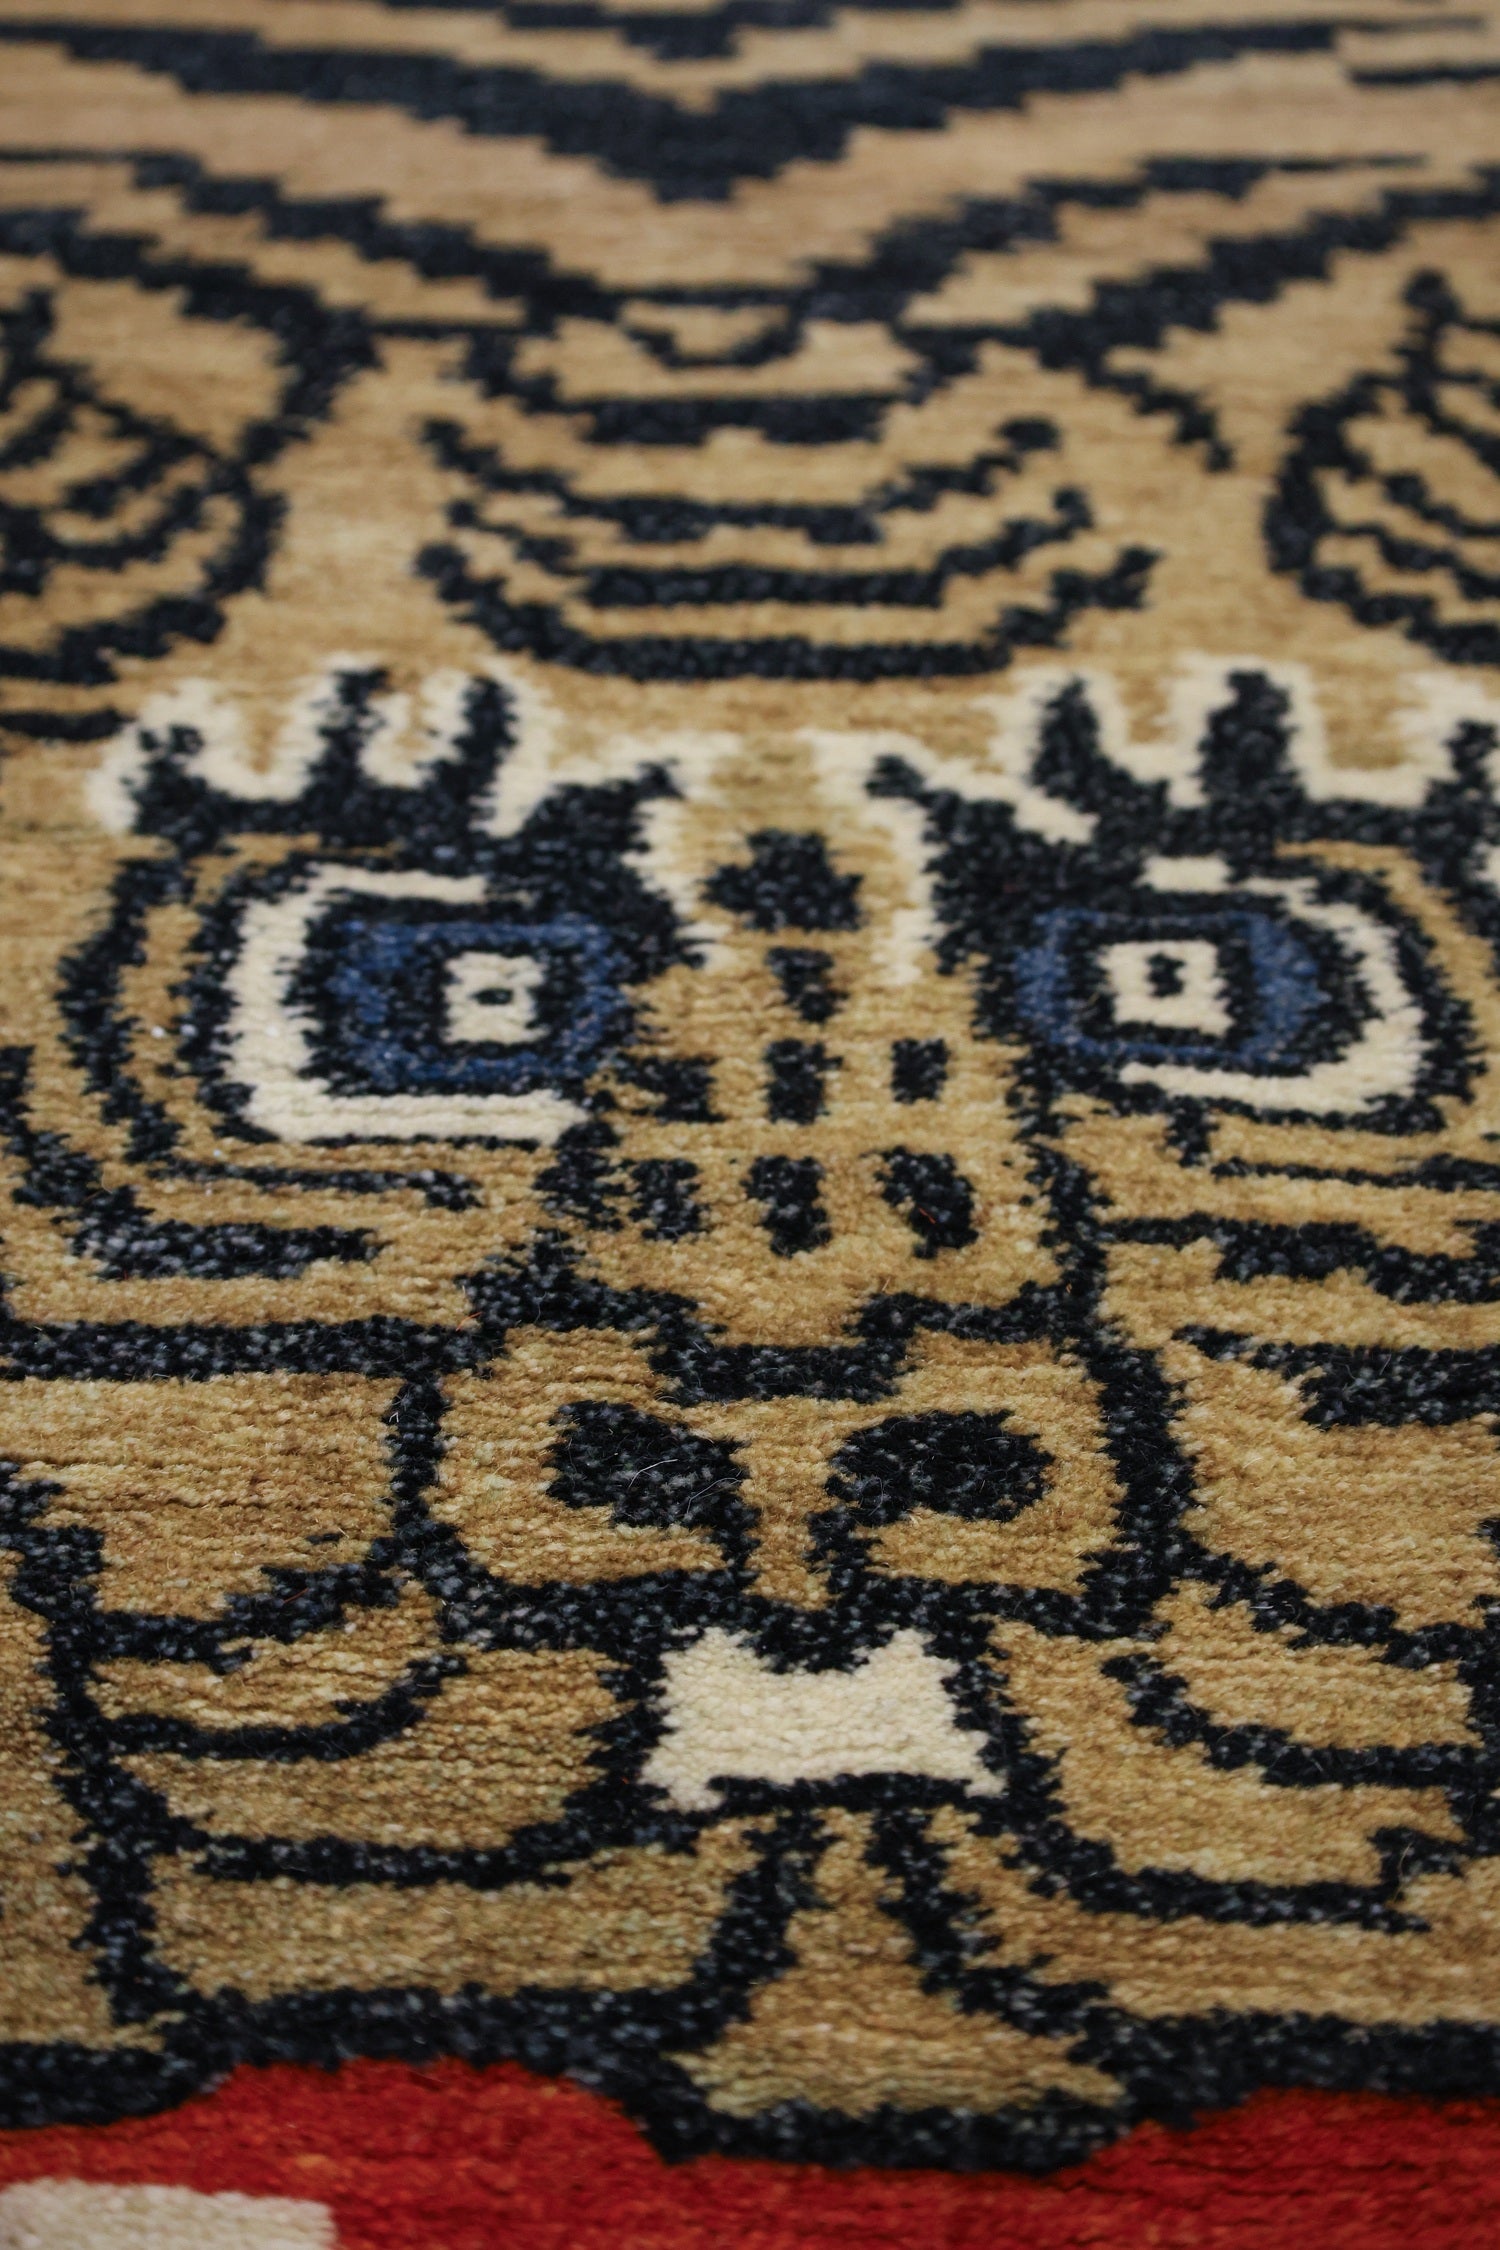 Tantric Tiger Handwoven Contemporary Rug, J70442